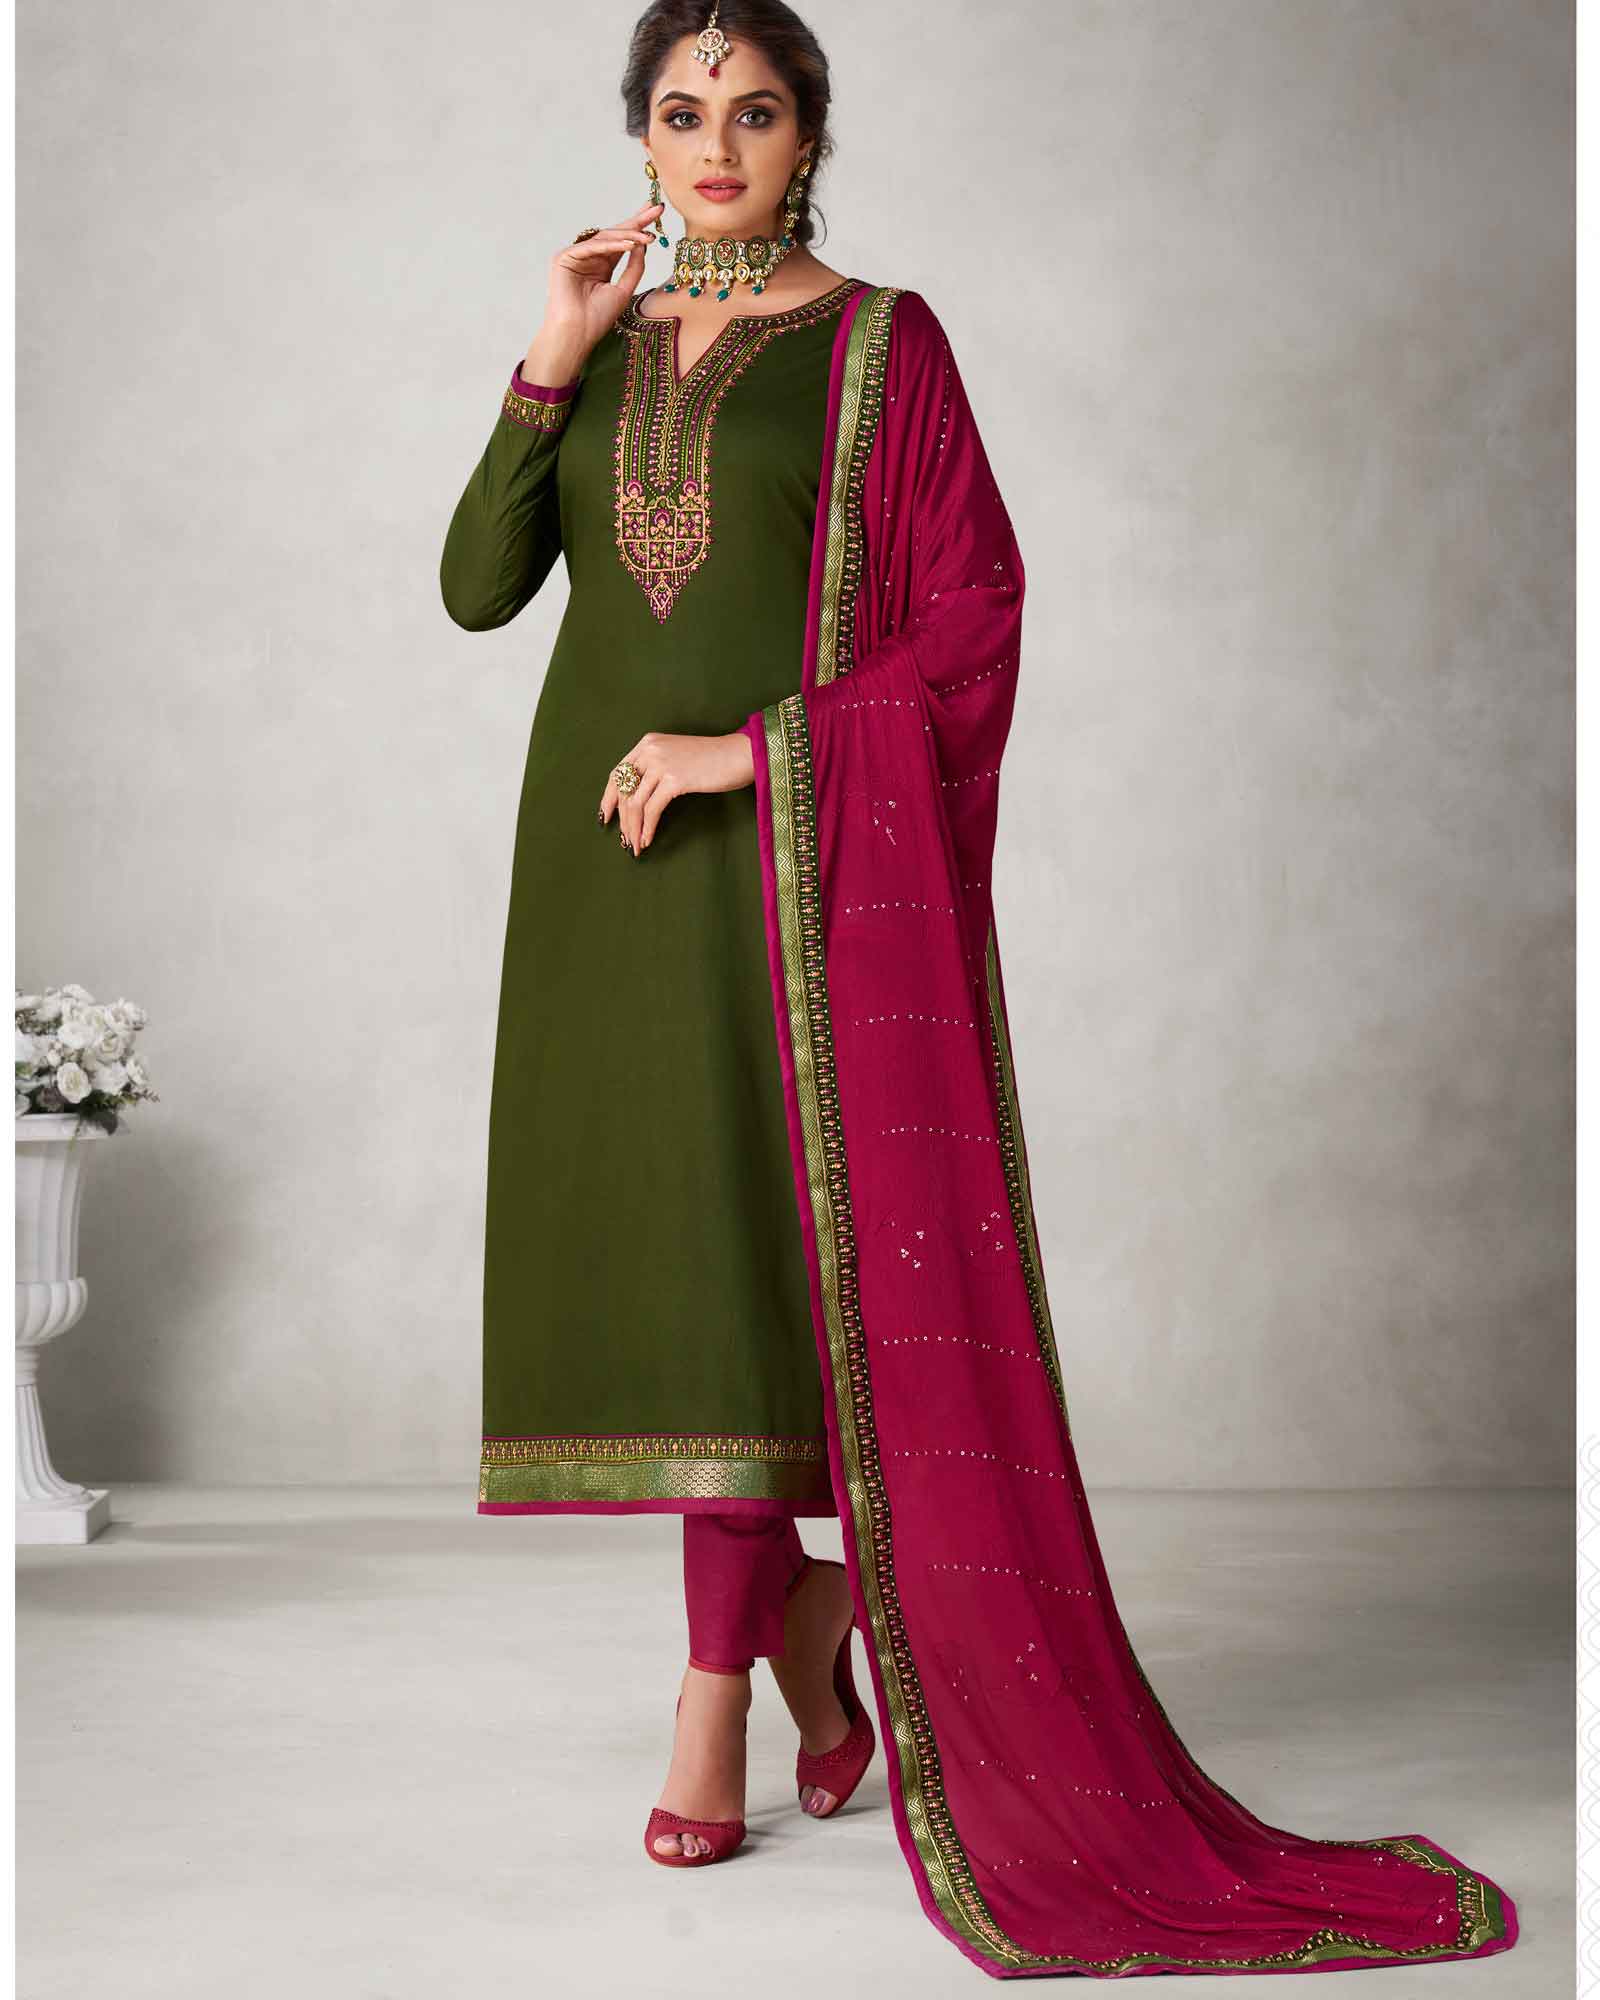 Exclusive Unstitched Dress Material Embroidery Work click here for buy  :http://goo.gl/yjXbB4 only R… | Indian clothes online, Online dress  shopping, Dress materials